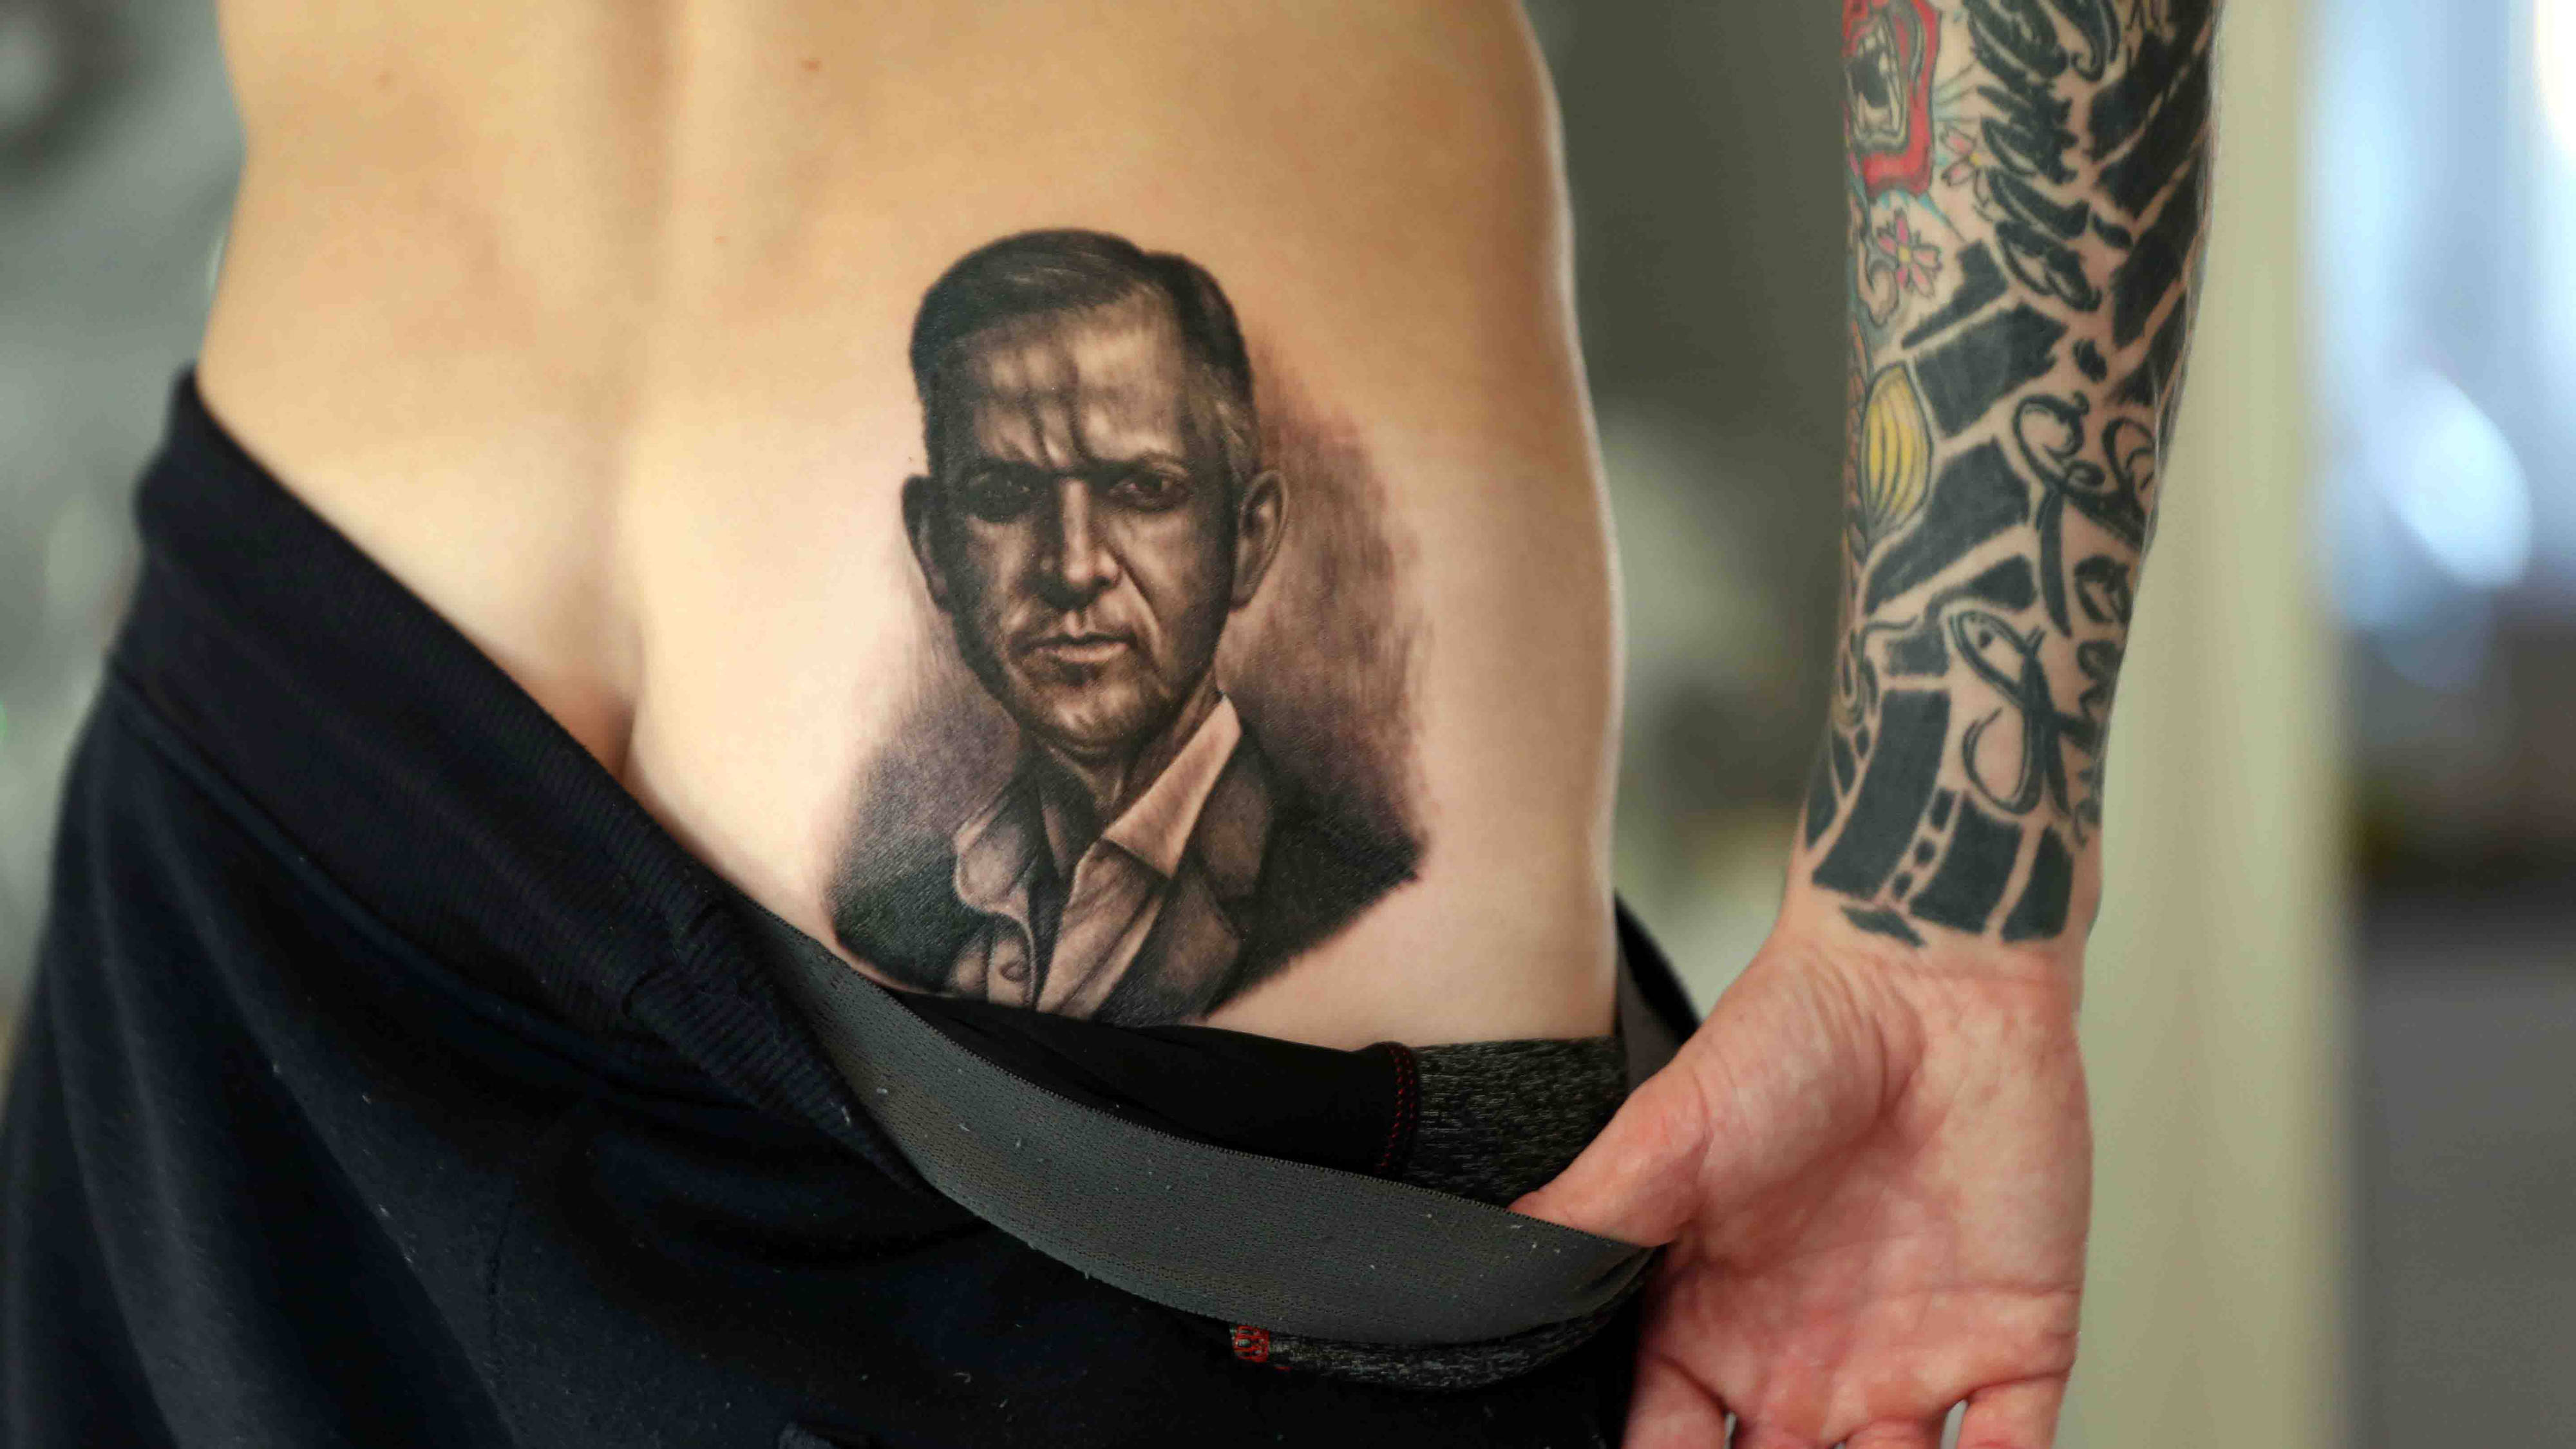 This man got a massive Jeremy Kyle tattoo on his bum - Heart